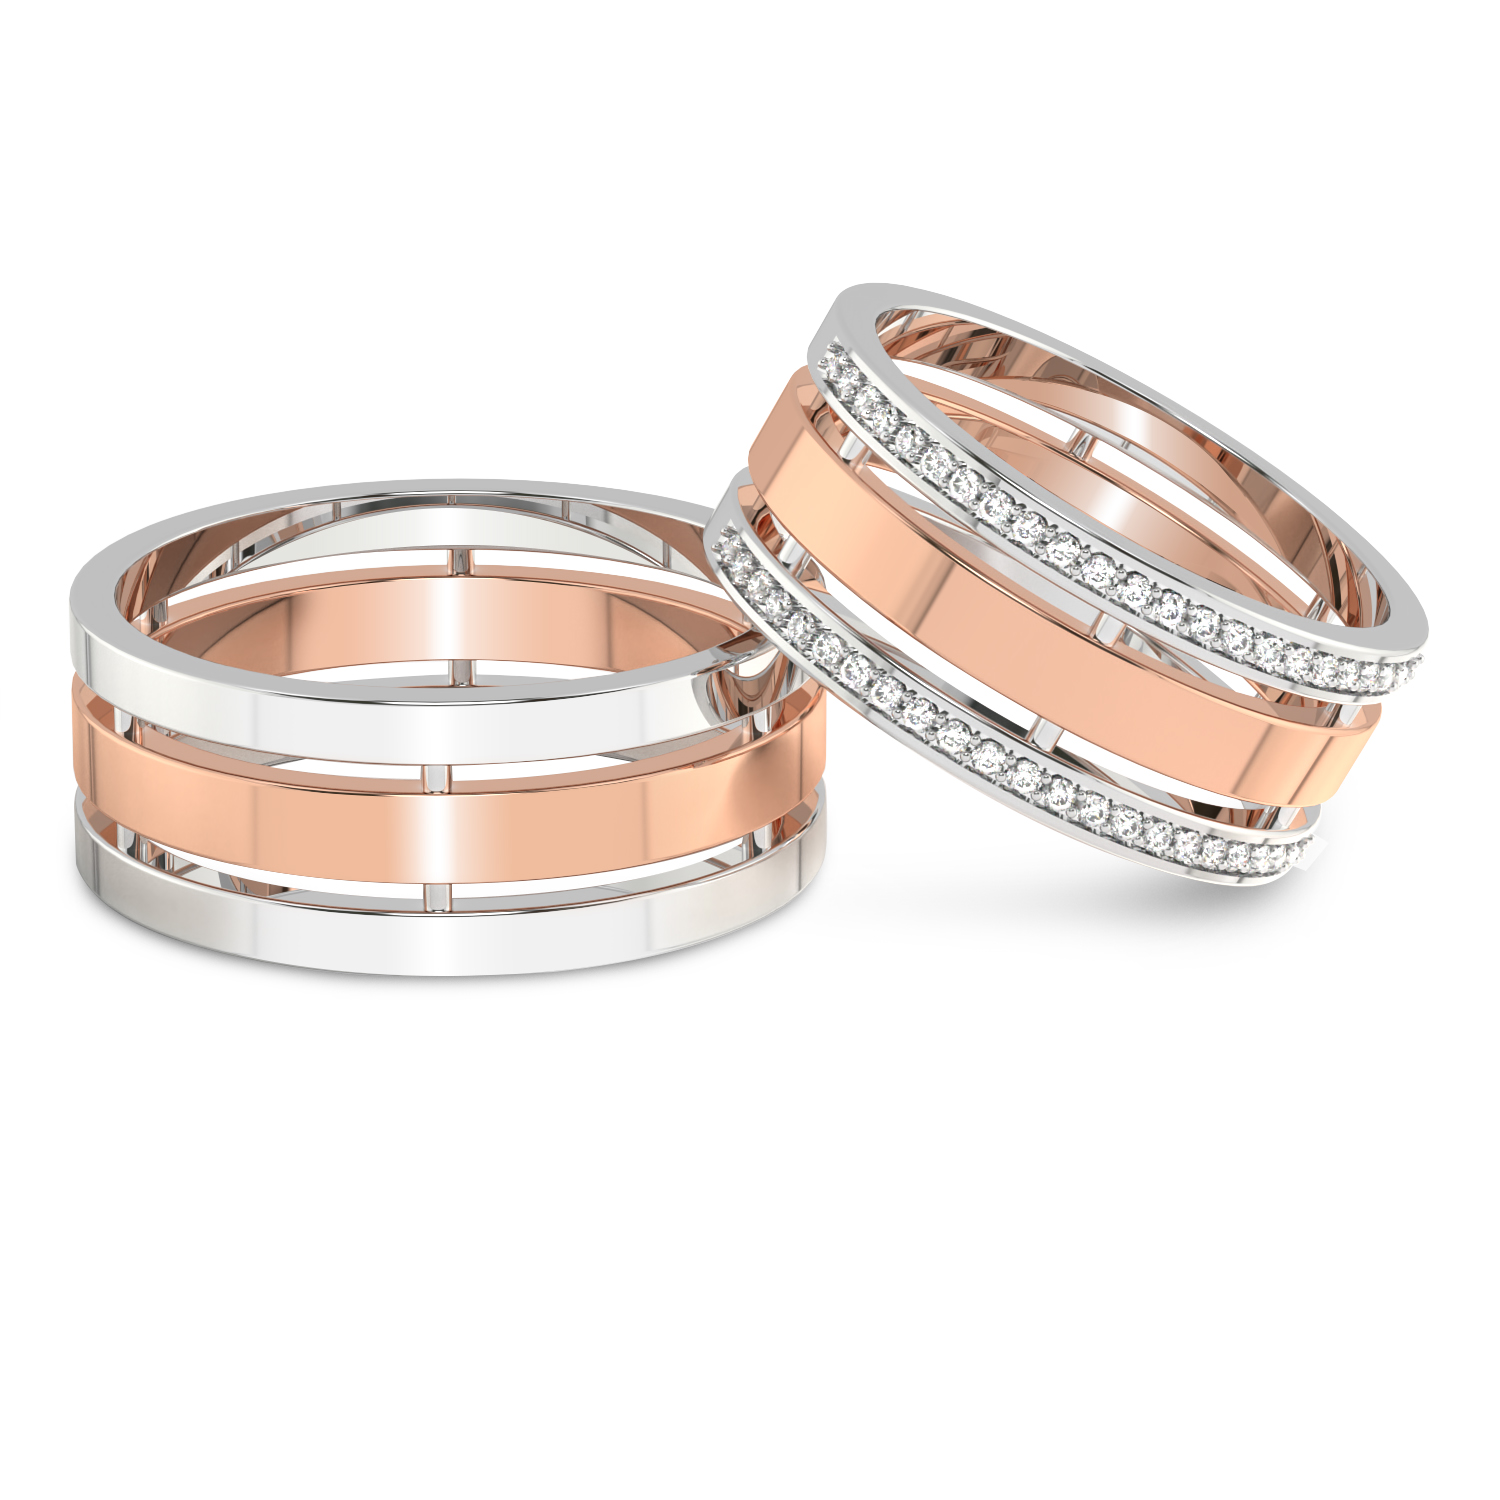 Unfading Love Couple Rings Front View